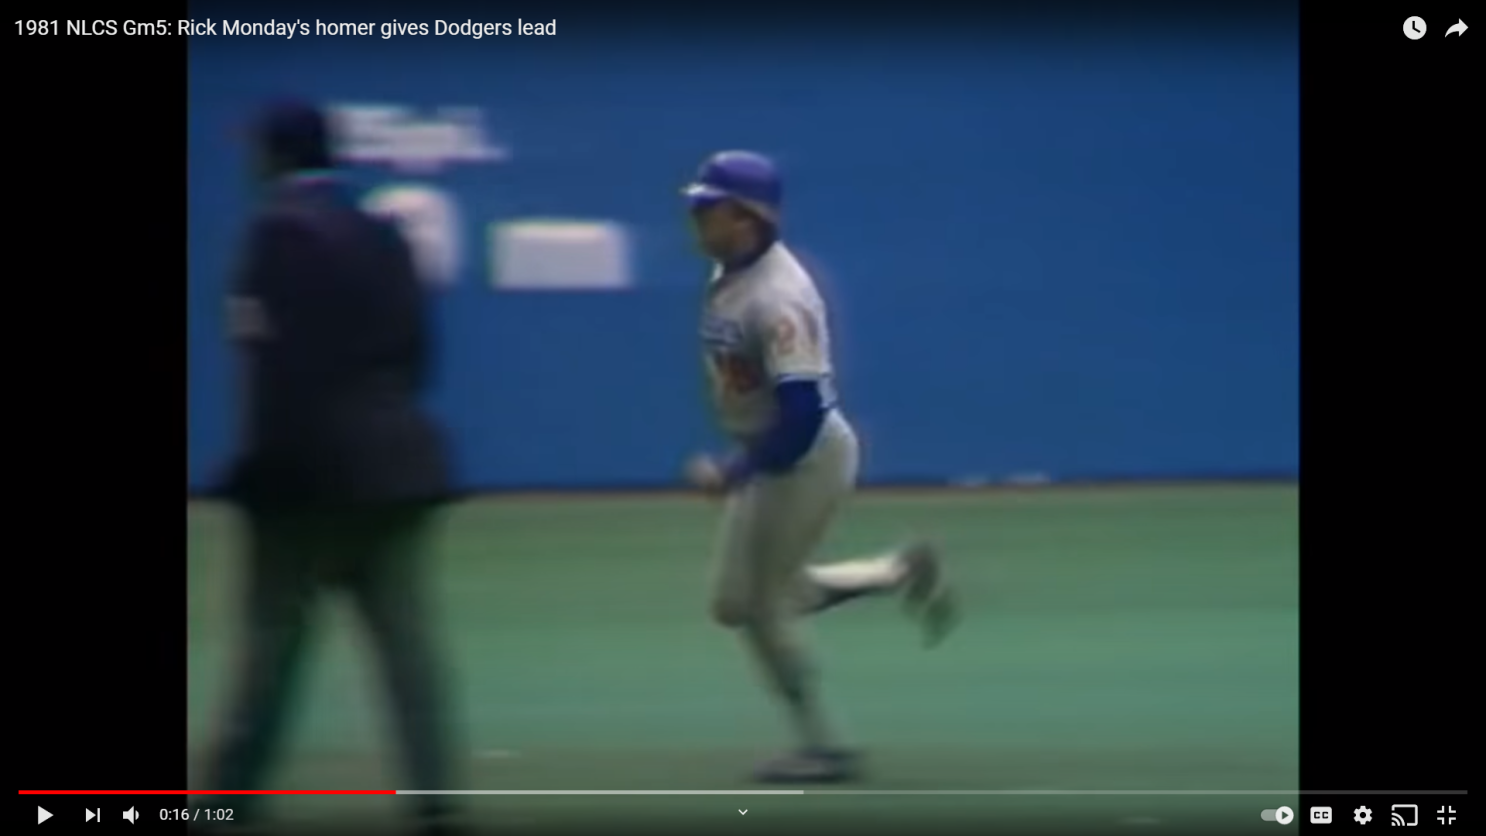 Greatest moments in Dodger history, No. 17: Rick Monday's 1981 NLCS home  run - Los Angeles Times